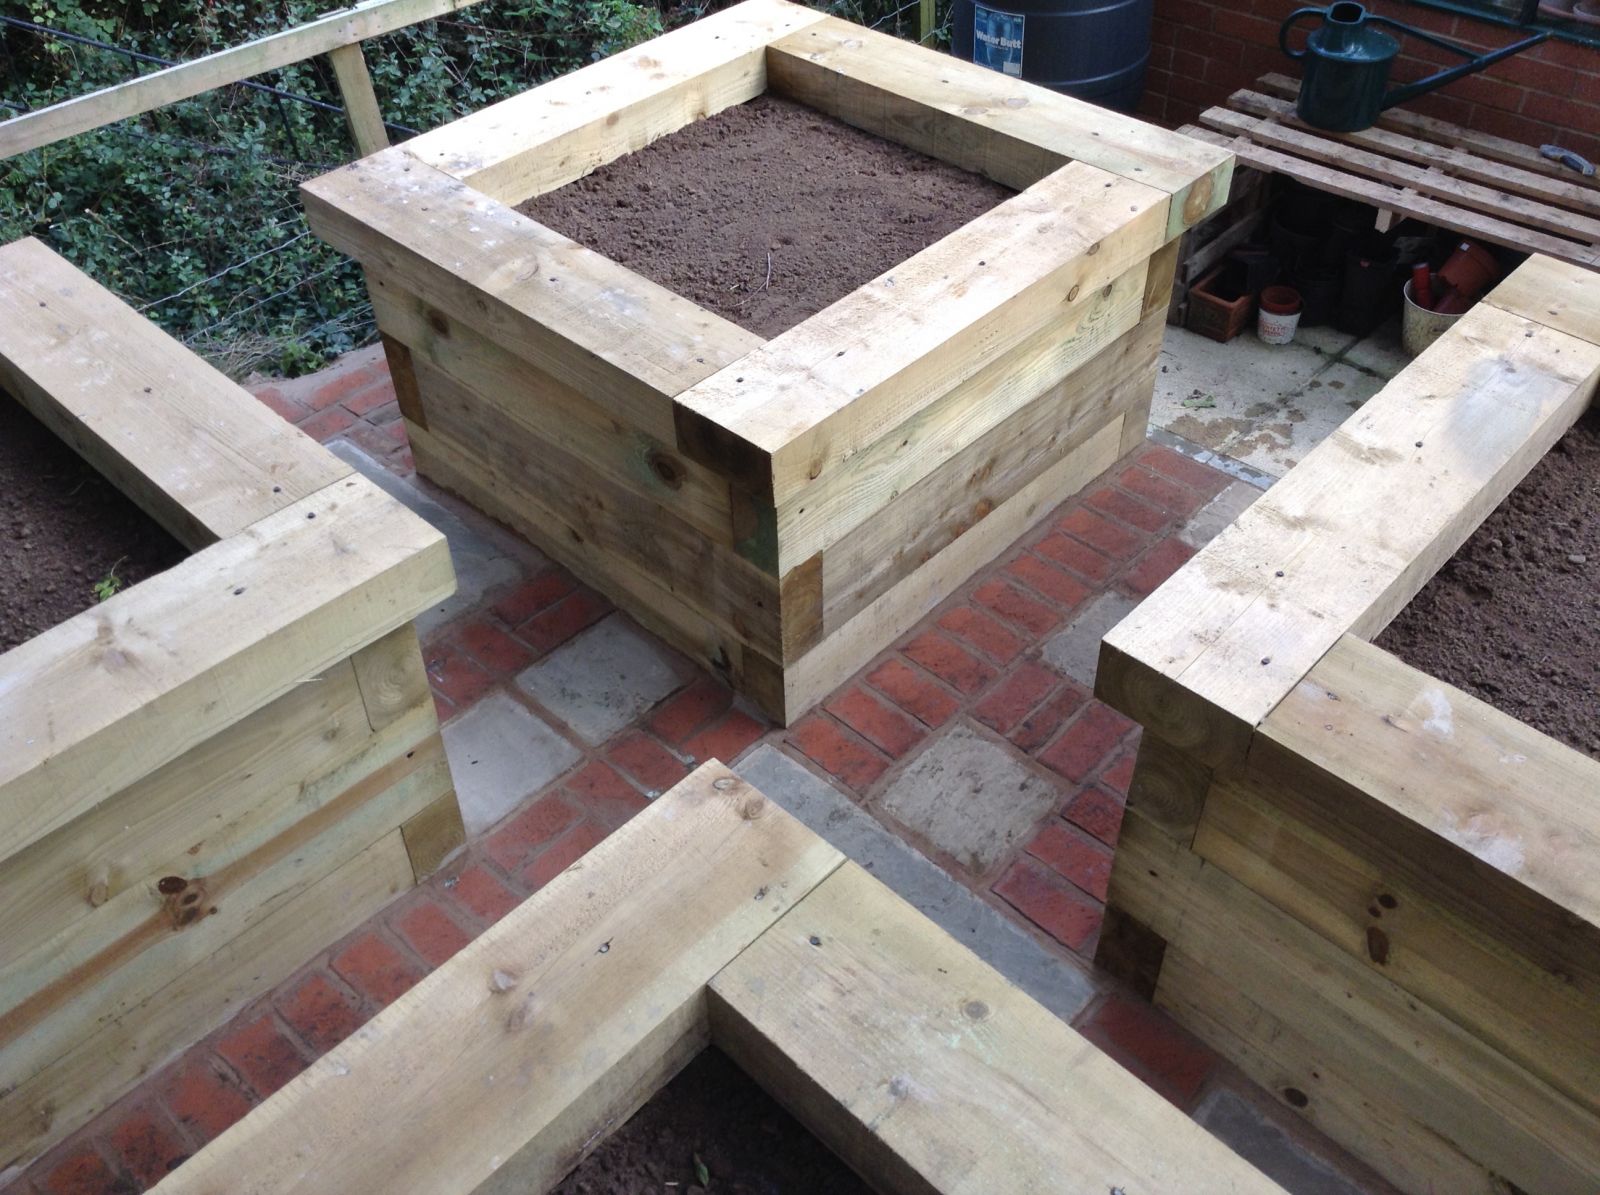 Collection of raised beds made from new pine railway sleepers. Railwaysleepers.com